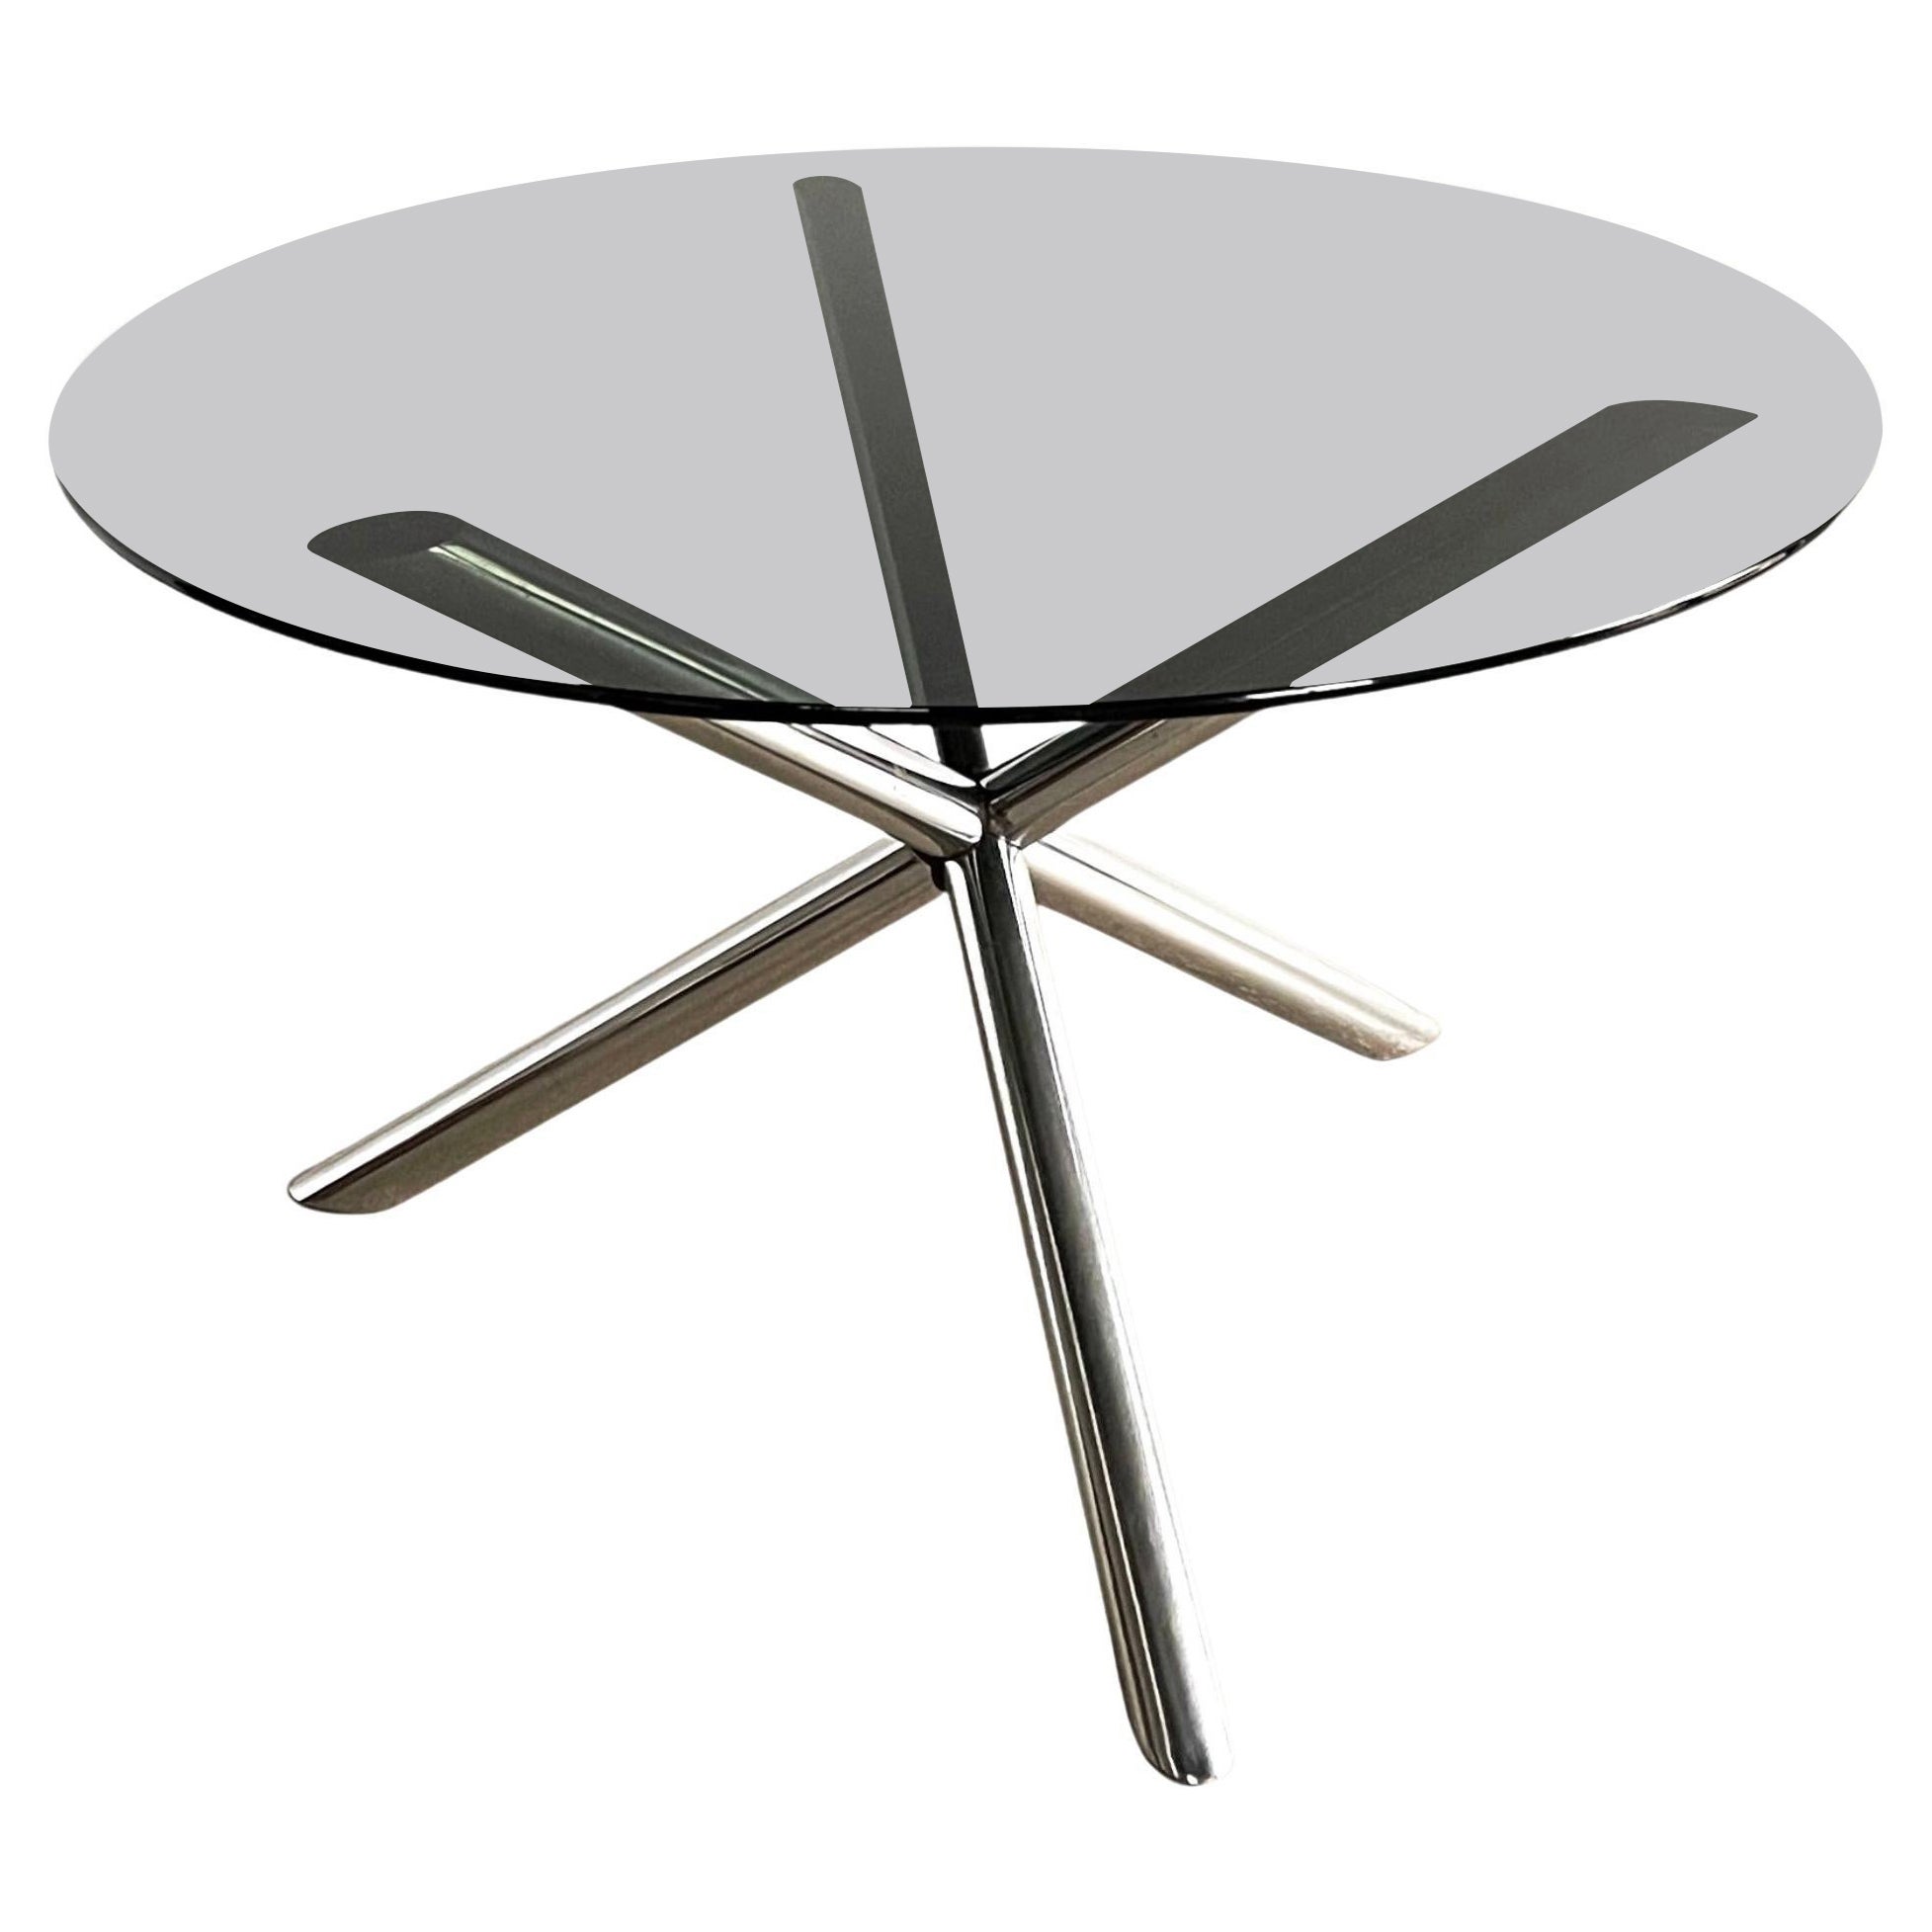 Italian Round Glass and Chromed Steel Dining Table, 1970s For Sale